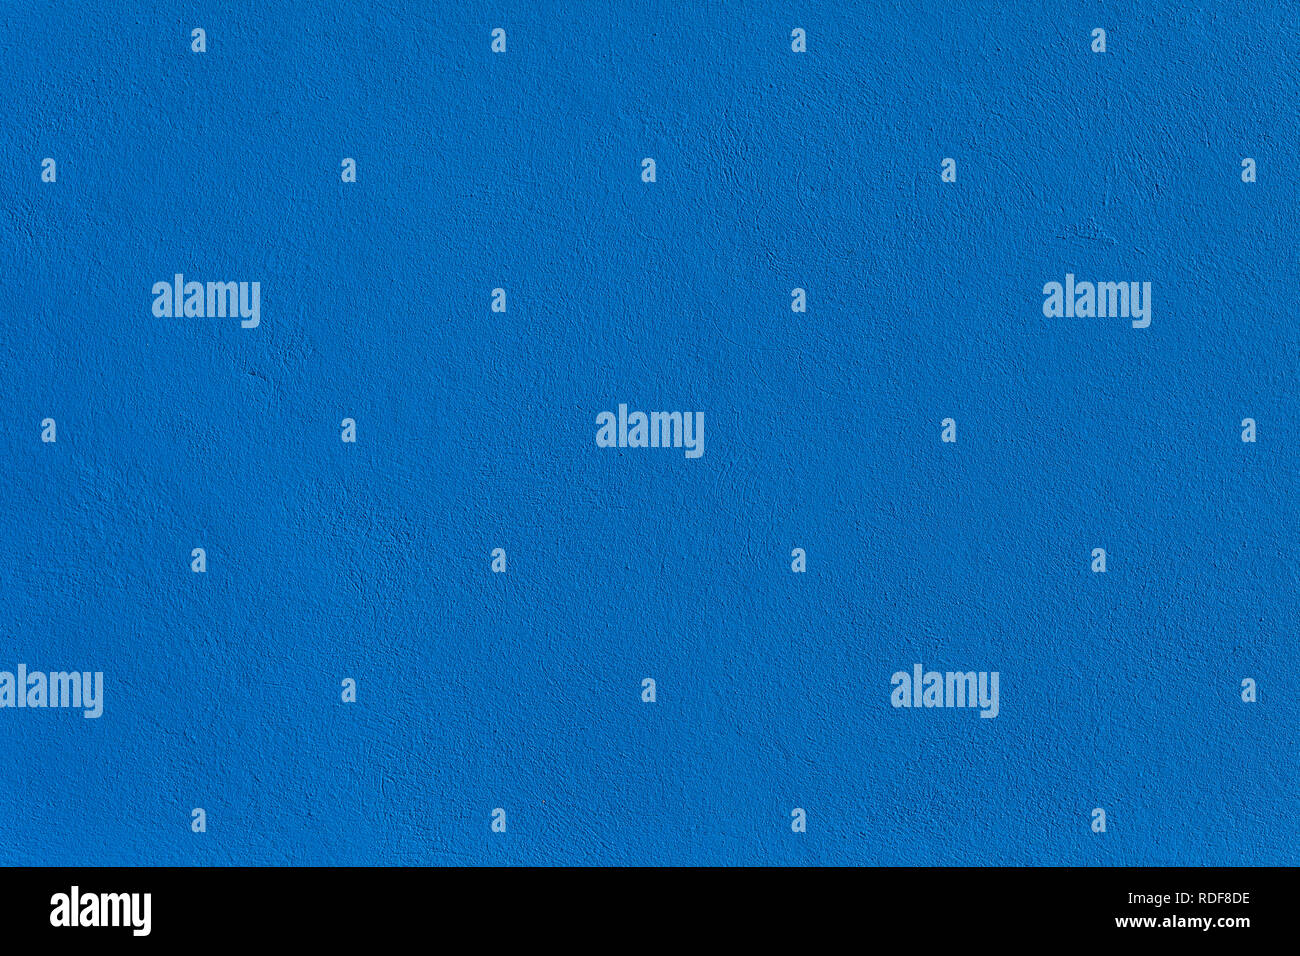 Background or texture of a cement wall painted blue. Stock Photo